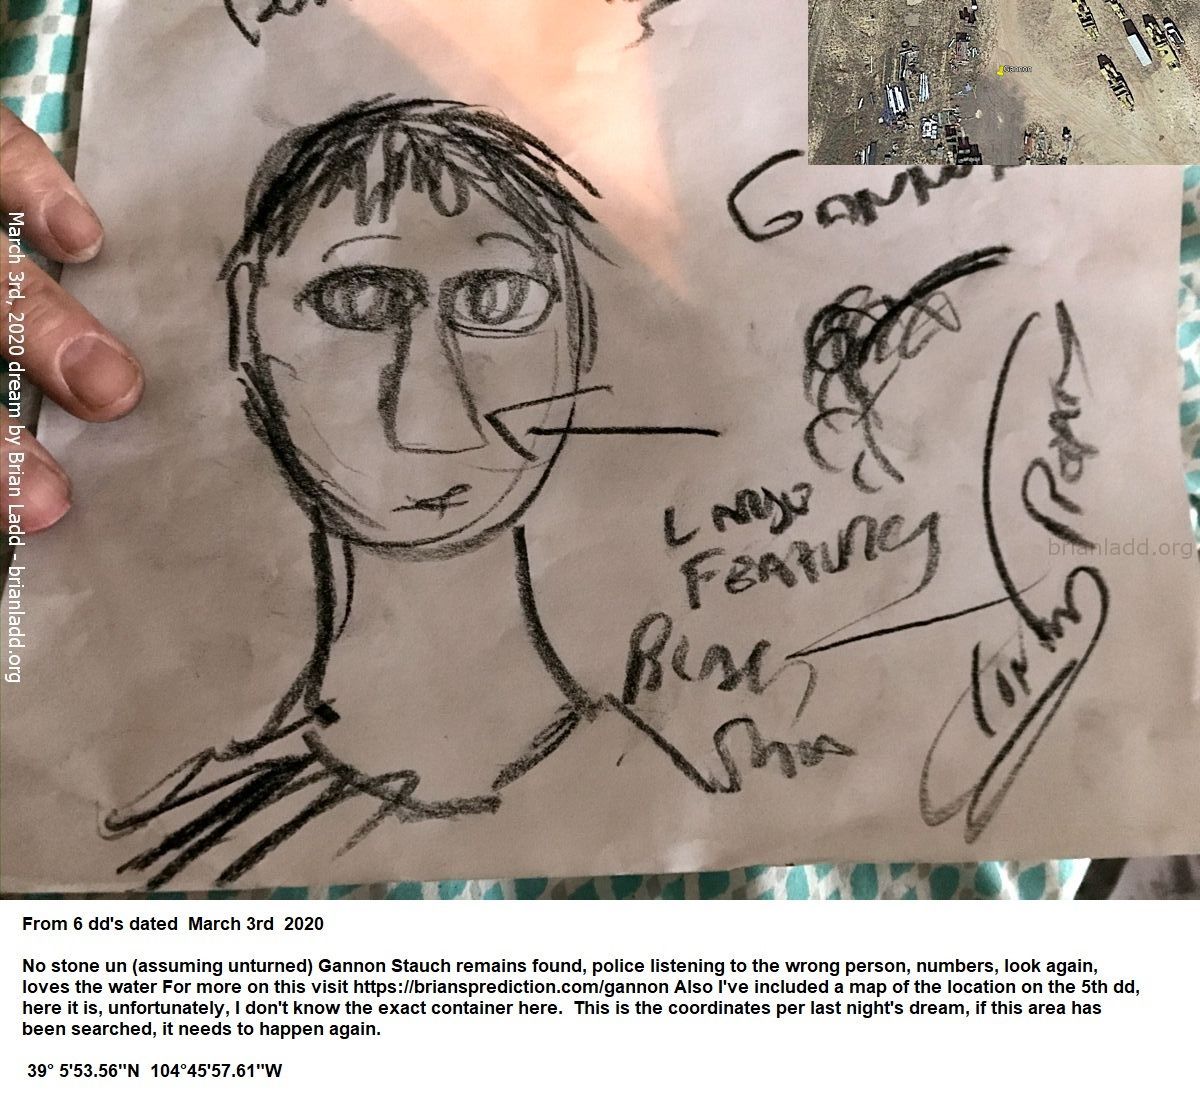 Gannon Stauch Missing Teen Found Psychic Brian Ladd 2 12797 3 March 2020 6 - From 6 Dd'S Dated  March 3rd  2020  No...
From 6 Dd'S Dated  March 3rd  2020  No Stone Un (assuming Unturned) Gannon Stauch Remains Found, Police Listening To The Wrong Person, Numbers, Look Again, Loves The Water For More On This Visit   https://briansprediction.com/Gannon Also I'Ve Included A Map Of The Location On The 5th Dd, Here It Is, Unfortunately, I Don'T Know The Exact Container Here.  This Is The Coordinates Per Last Night'S Dream, If This Area Has Been Searched, It Needs To Happen Again.  39â° 5'53.56&Quot;N  104â°45'57.61&Quot;W
